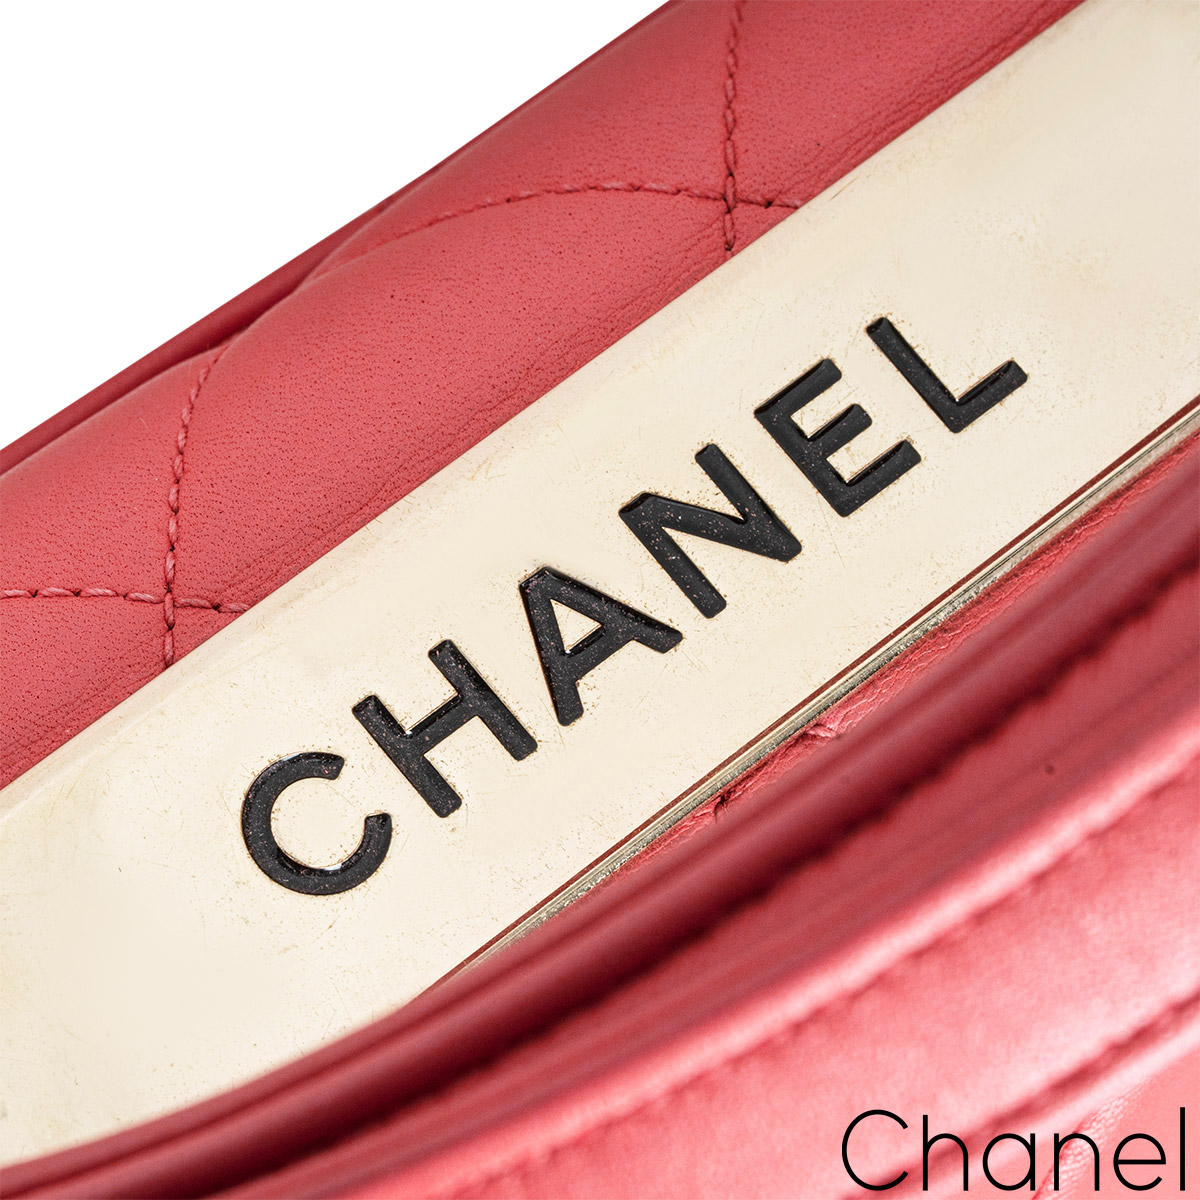 Chanel Small Pink Trendy CC Flap Bag